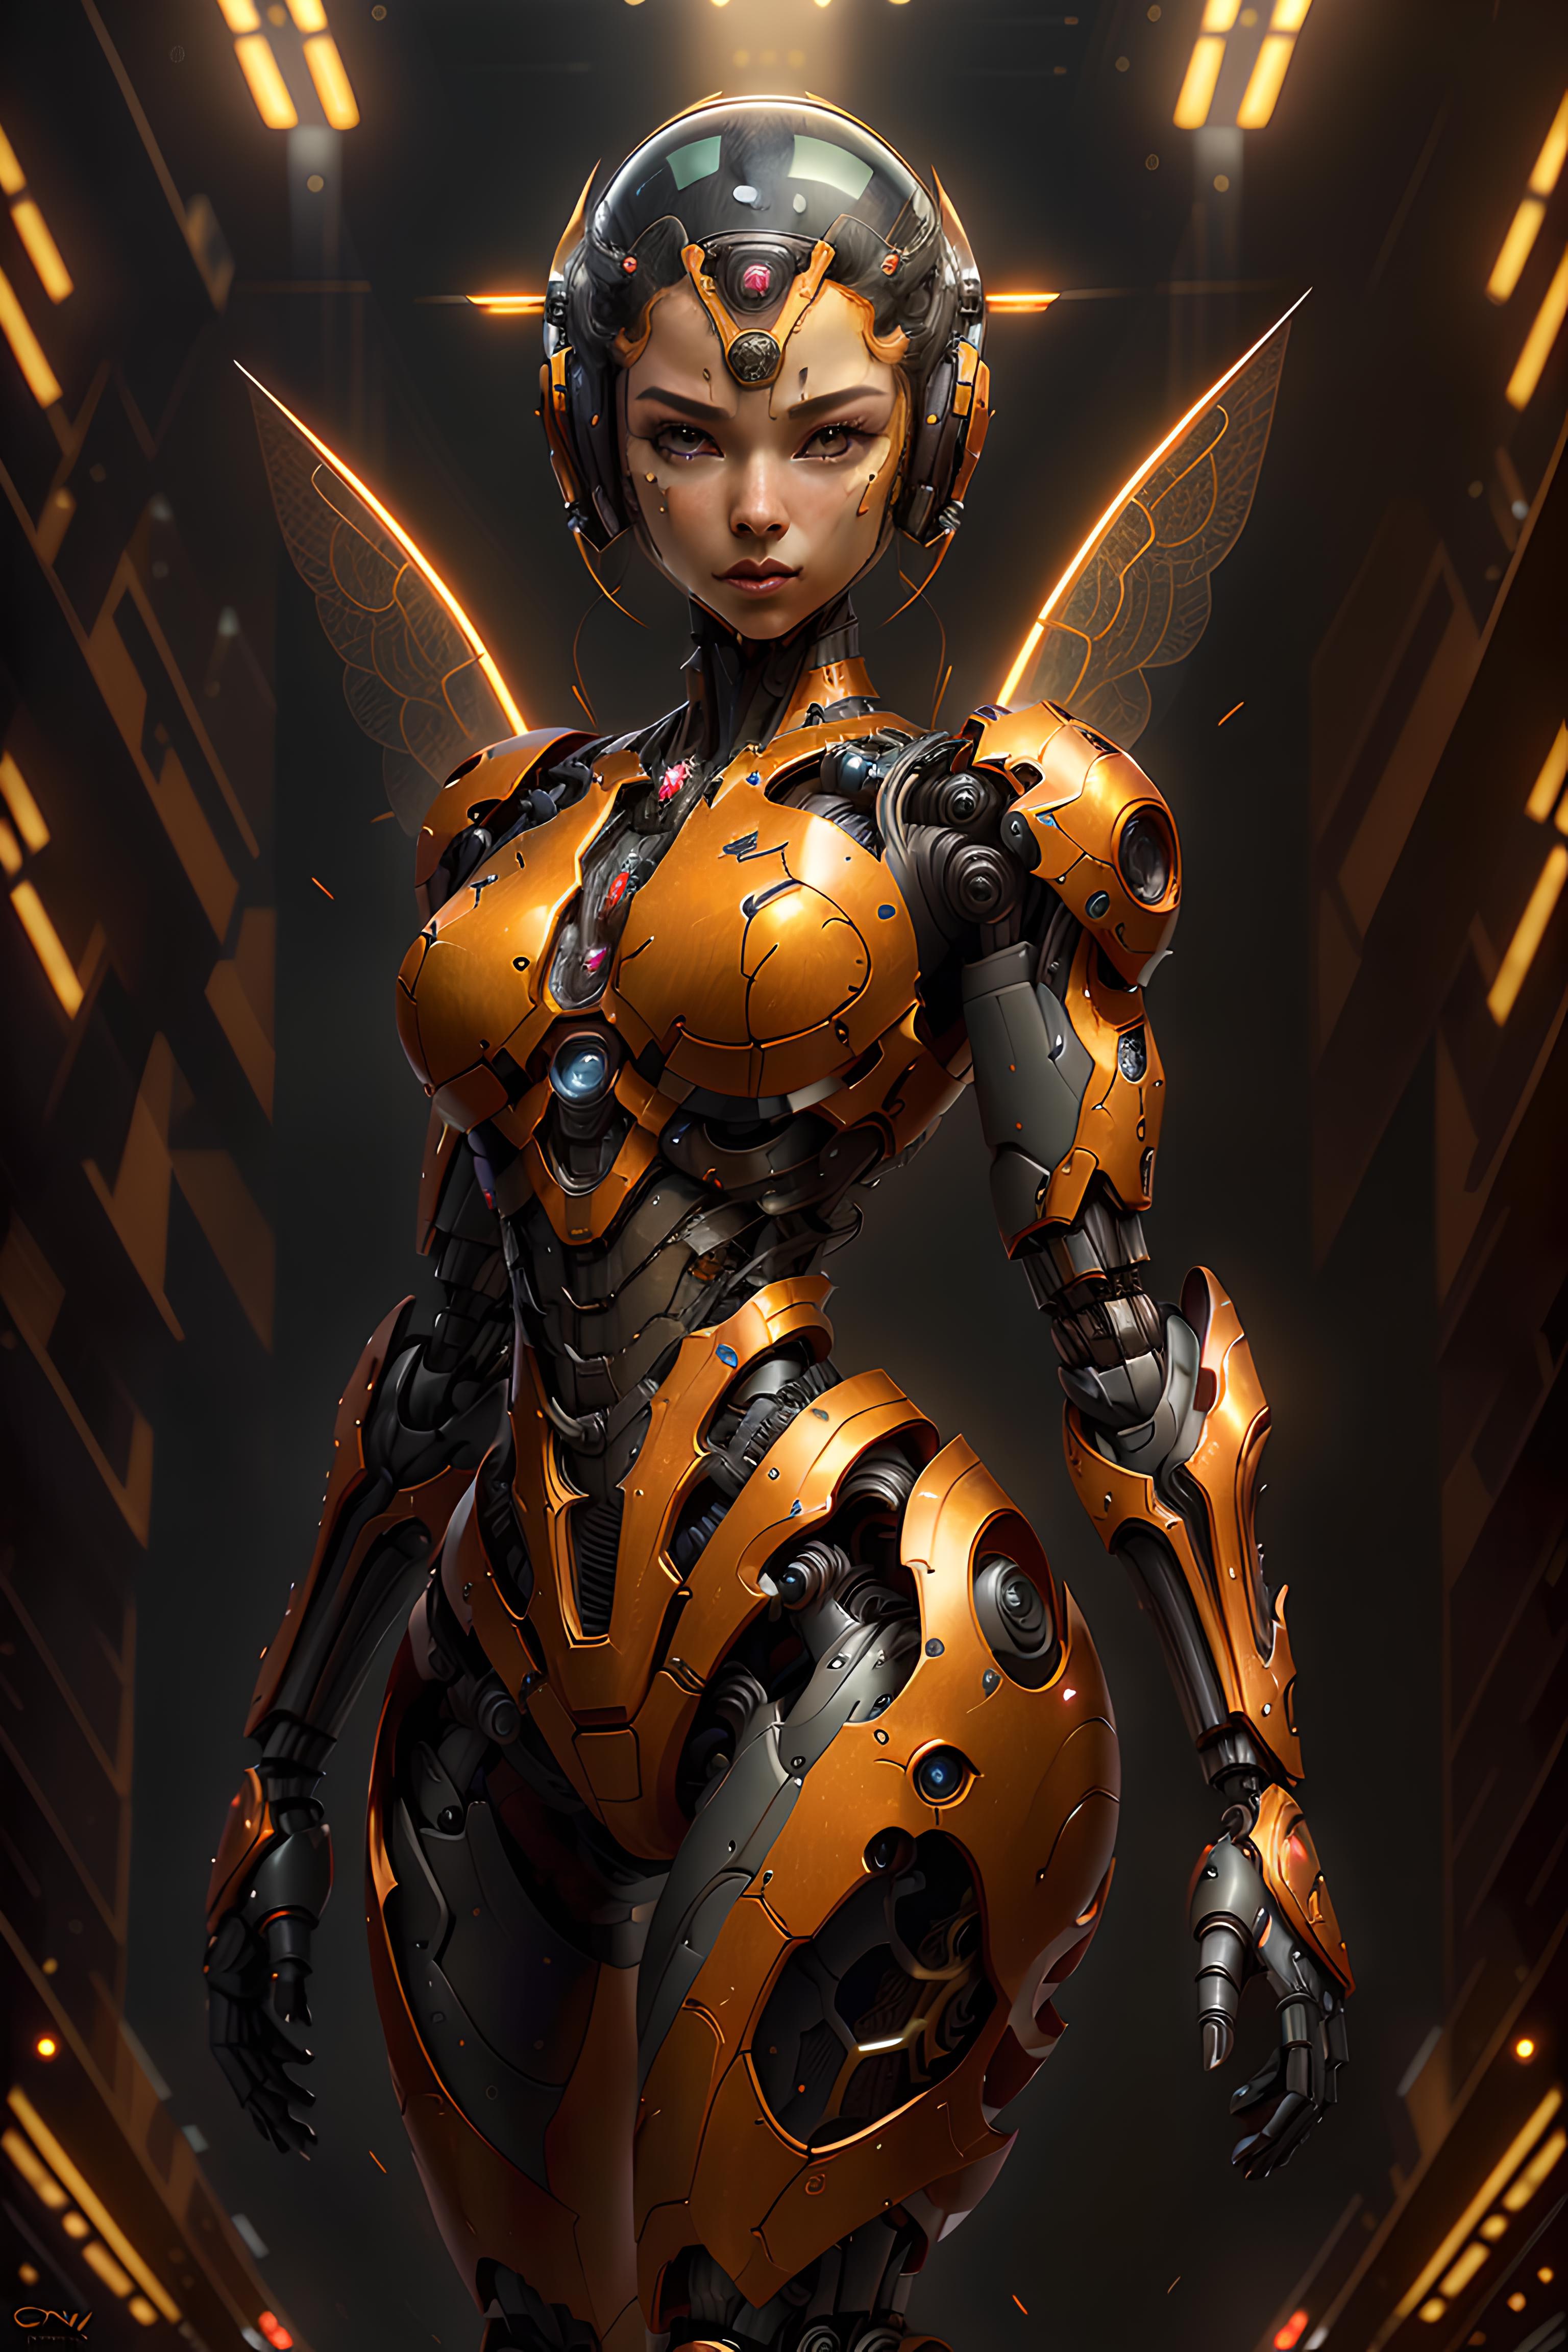 A robot with wings and gears on its body, standing in front of an orange wall.